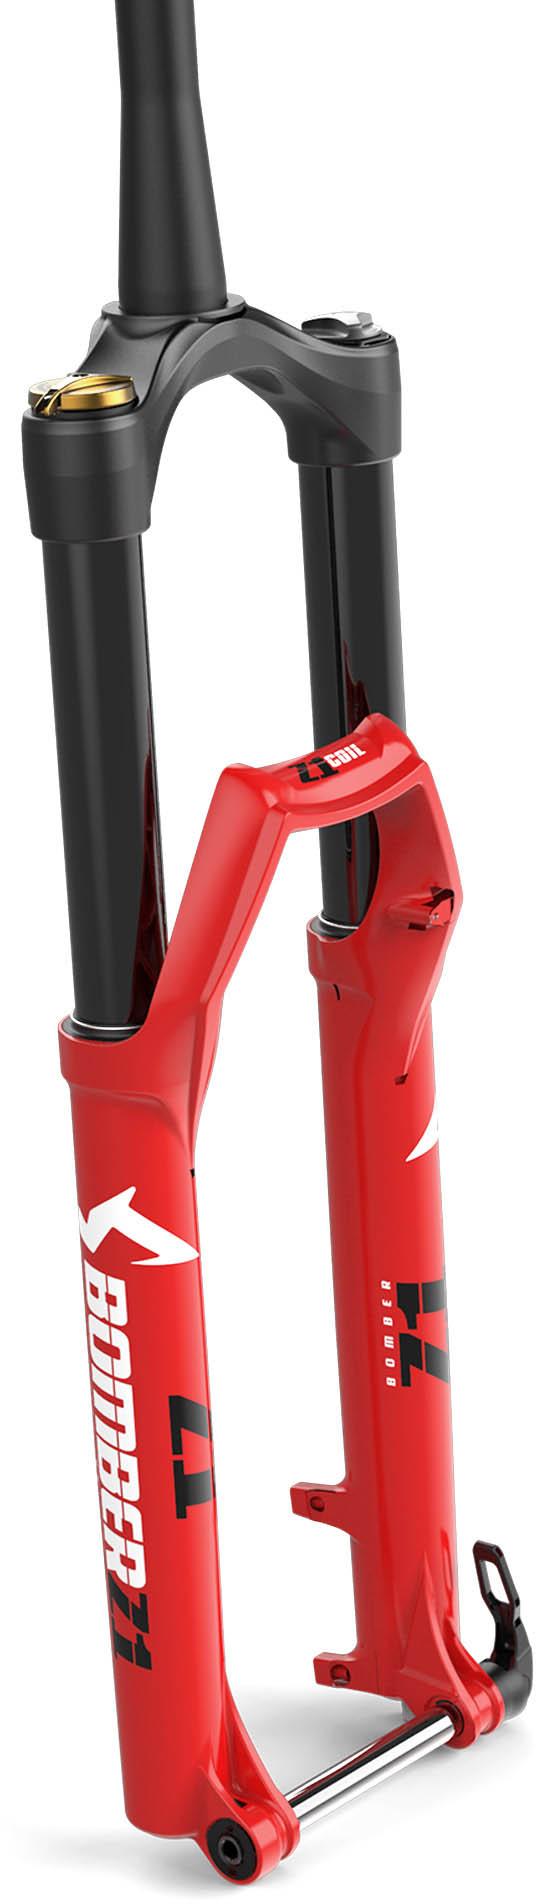 Marzocchi Bomber Z1 Coil Mountain Bike Forks  Red